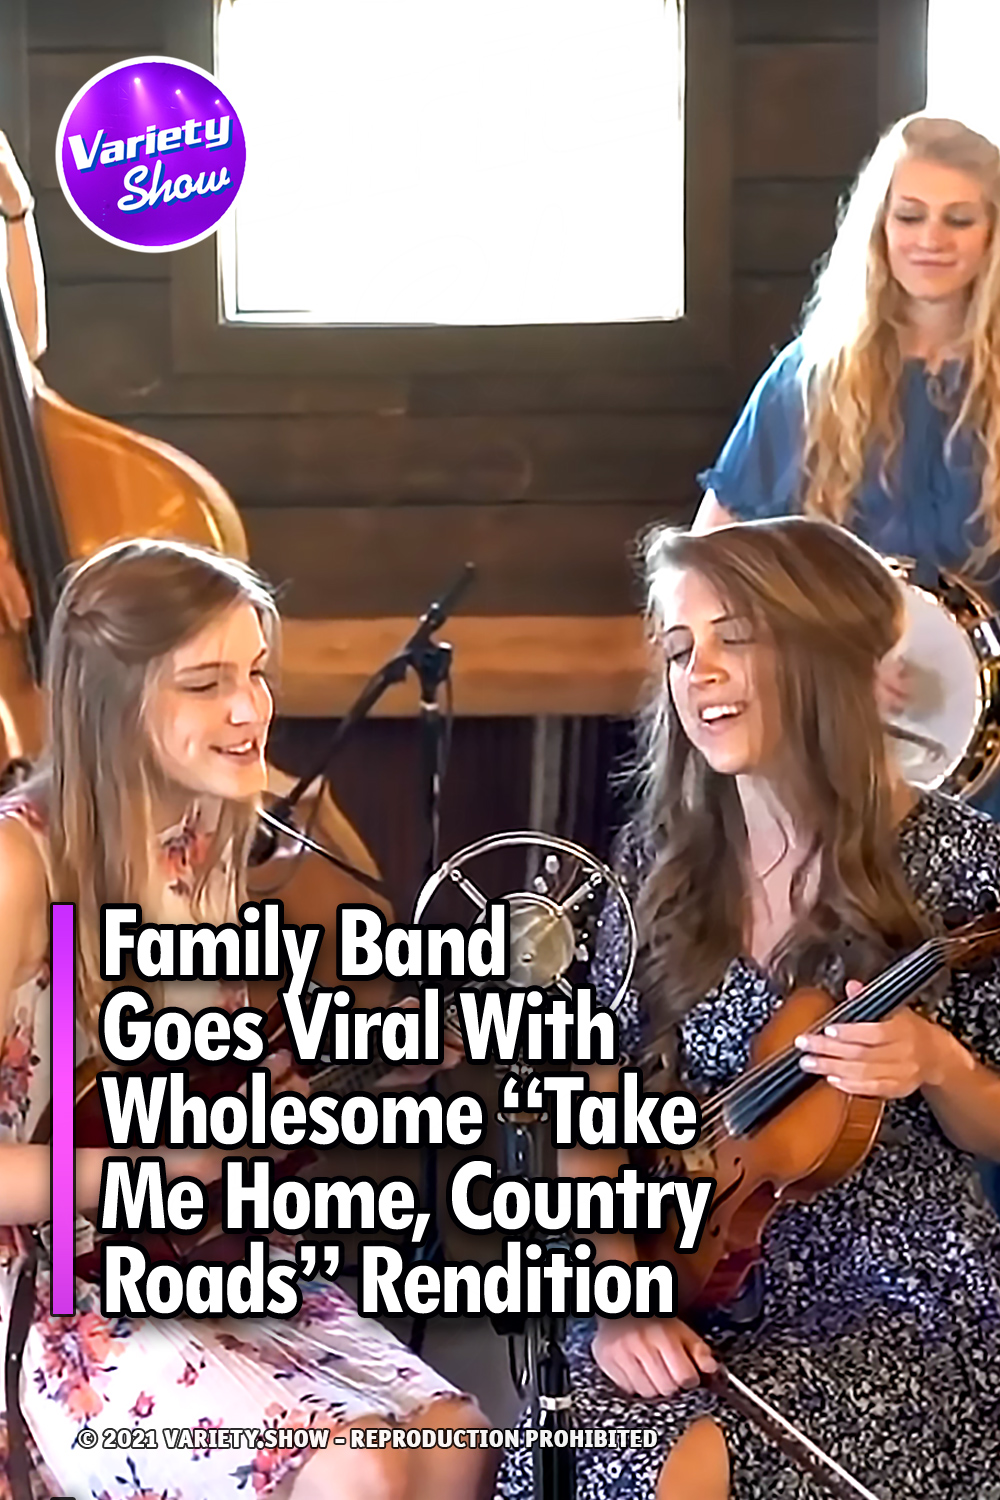 Family Band Goes Viral With Wholesome “Take Me Home, Country Roads” Rendition